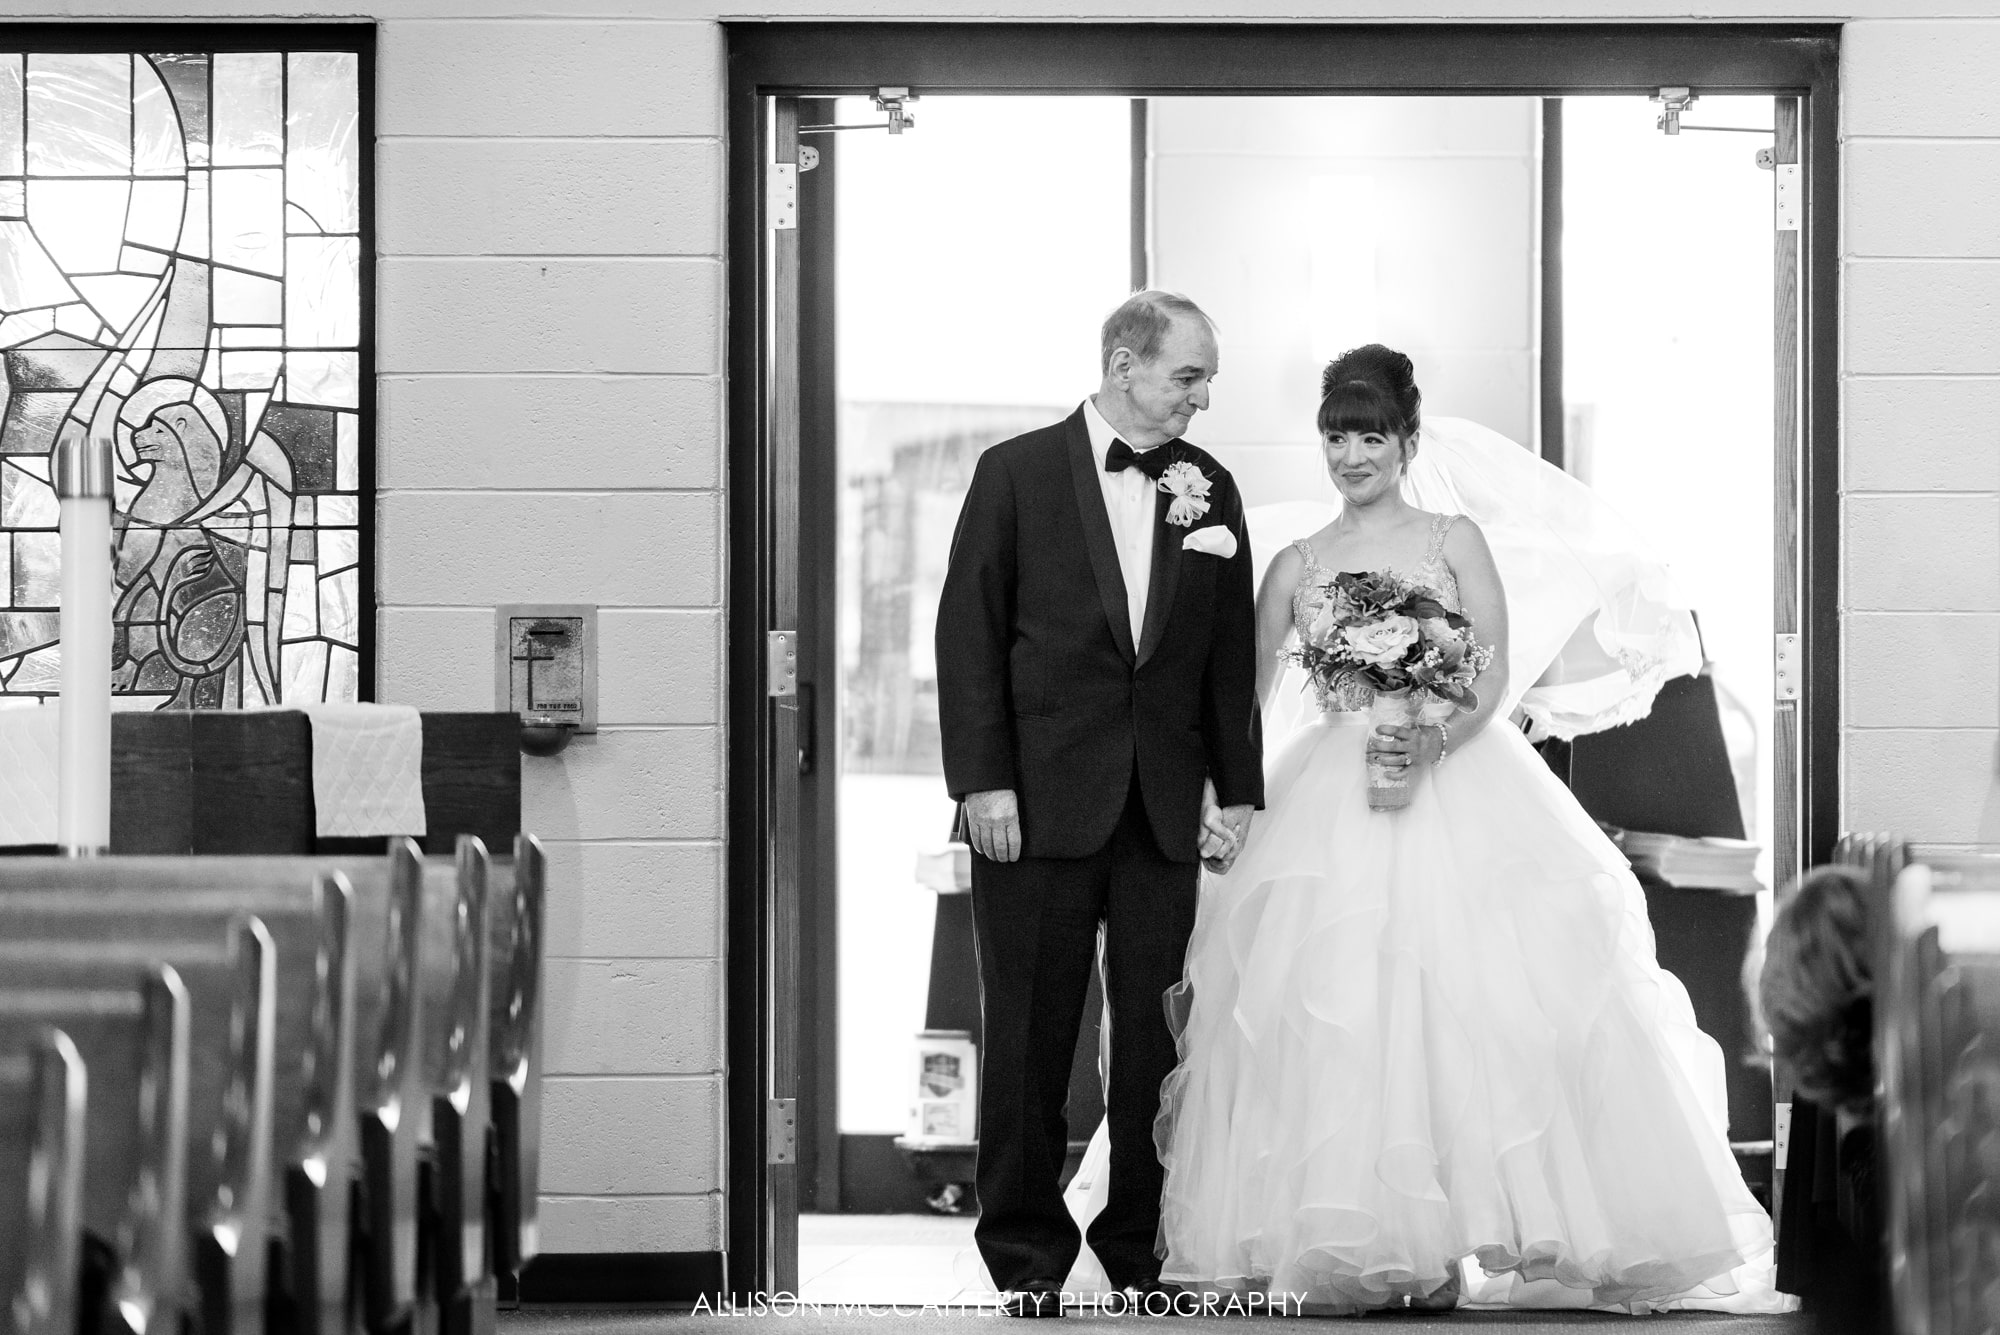 Black and White photo of the bride and her dad getting ready to walk down the aisle